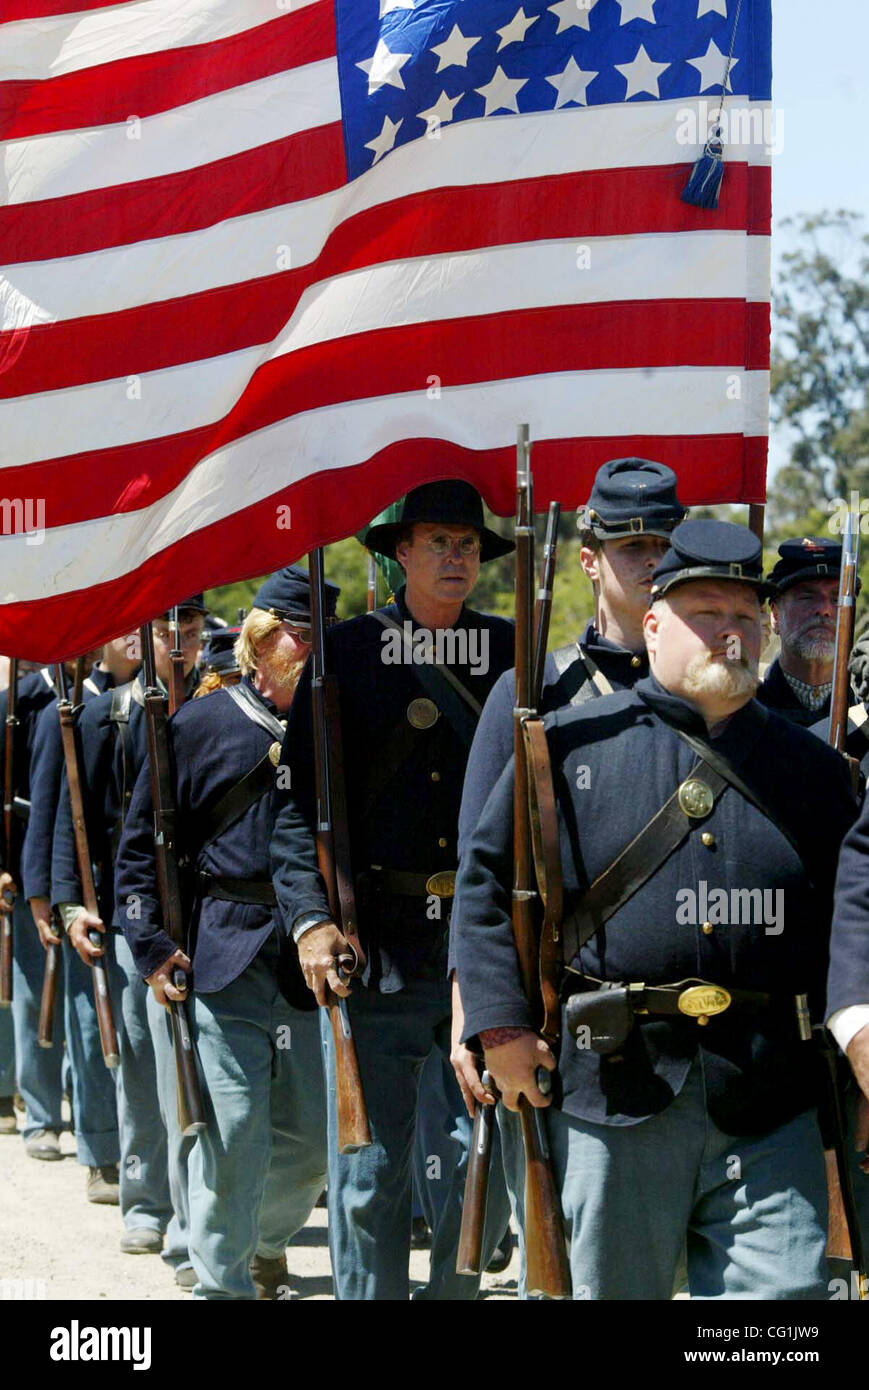 Union Army Civil War re-enactors march towards the battlefield during Civil Wars Days at Ardenwood Historic Farms, in Fremont, California, on Saturday August 18, 2007.  (Anda Chu/The Fremont Argus)  (Anda Chu/The Fremont Argus) Stock Photo